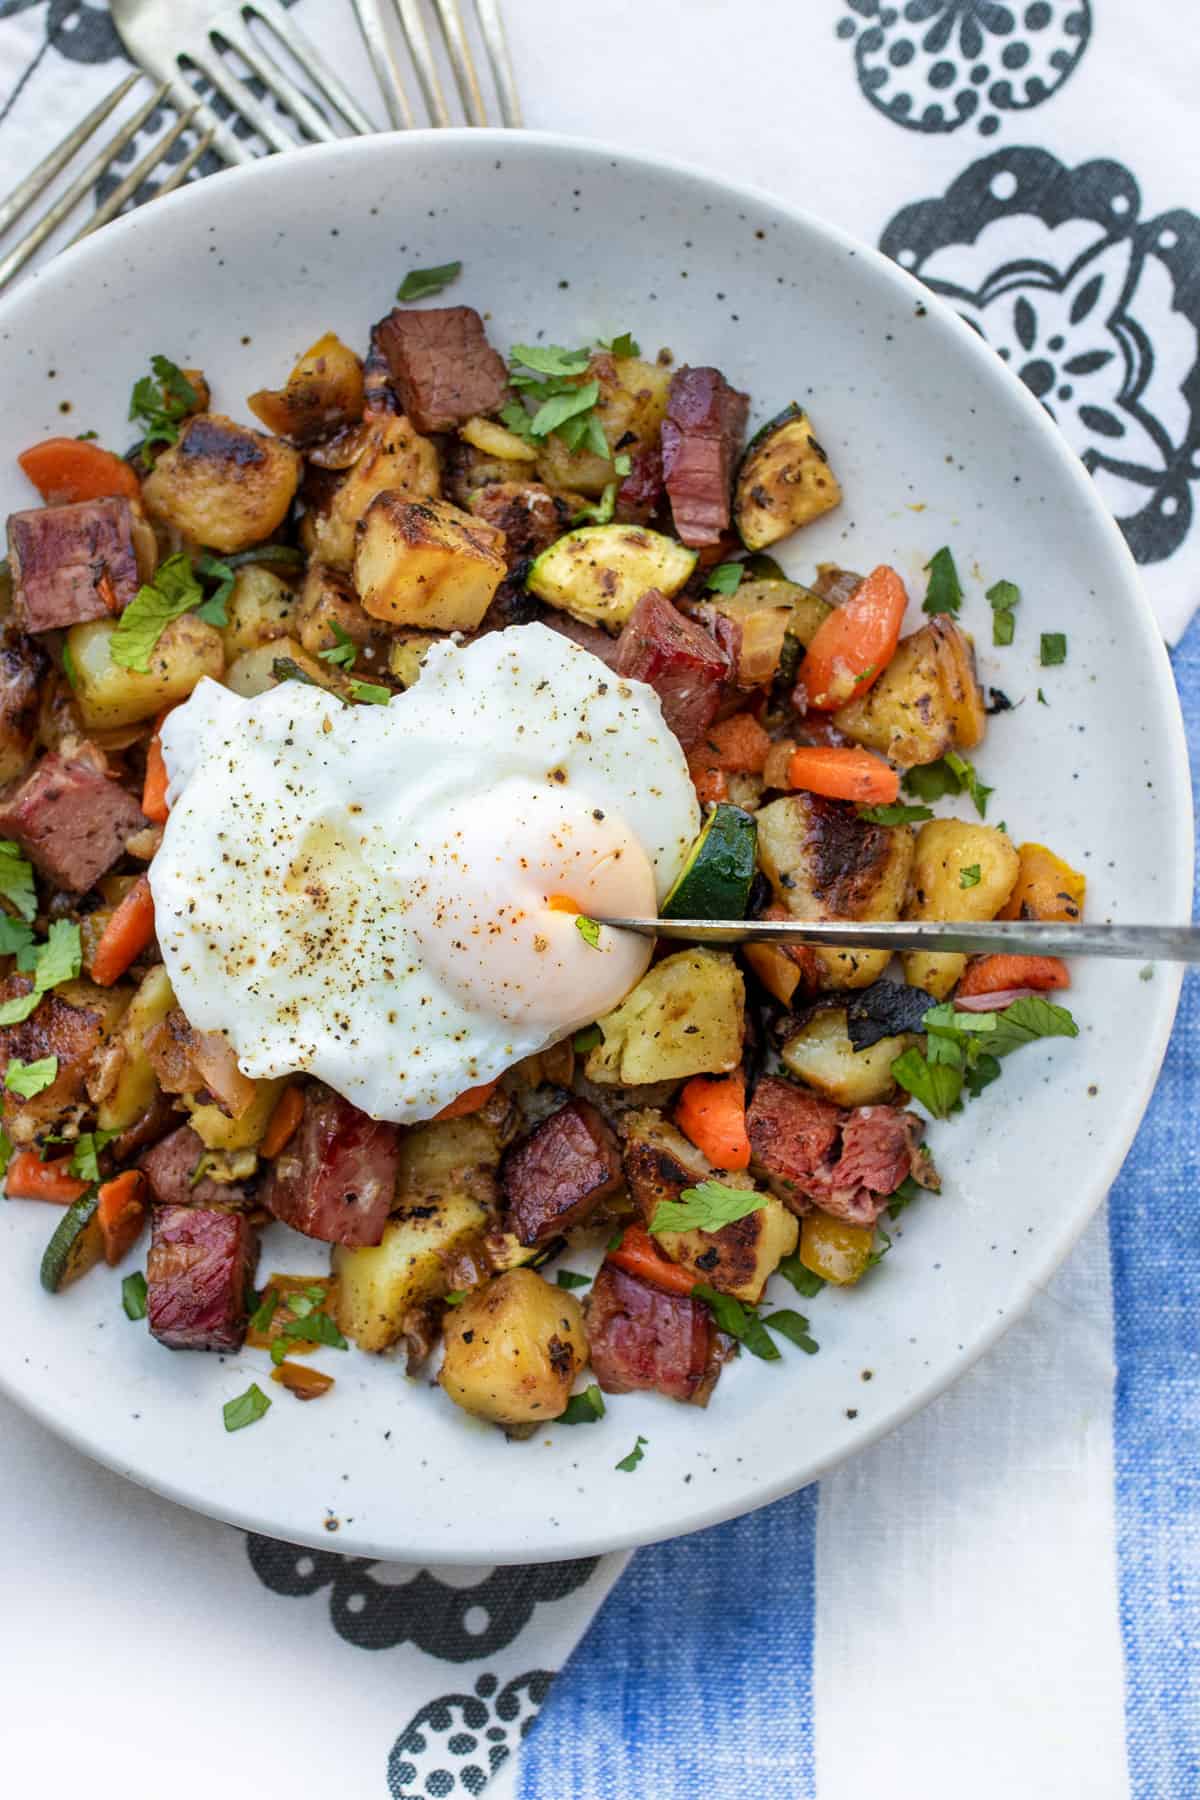 Corned beef hash with carrots, peppers and zucchini in the mix, topped with a poached egg that has a knife cutting into the yolk.